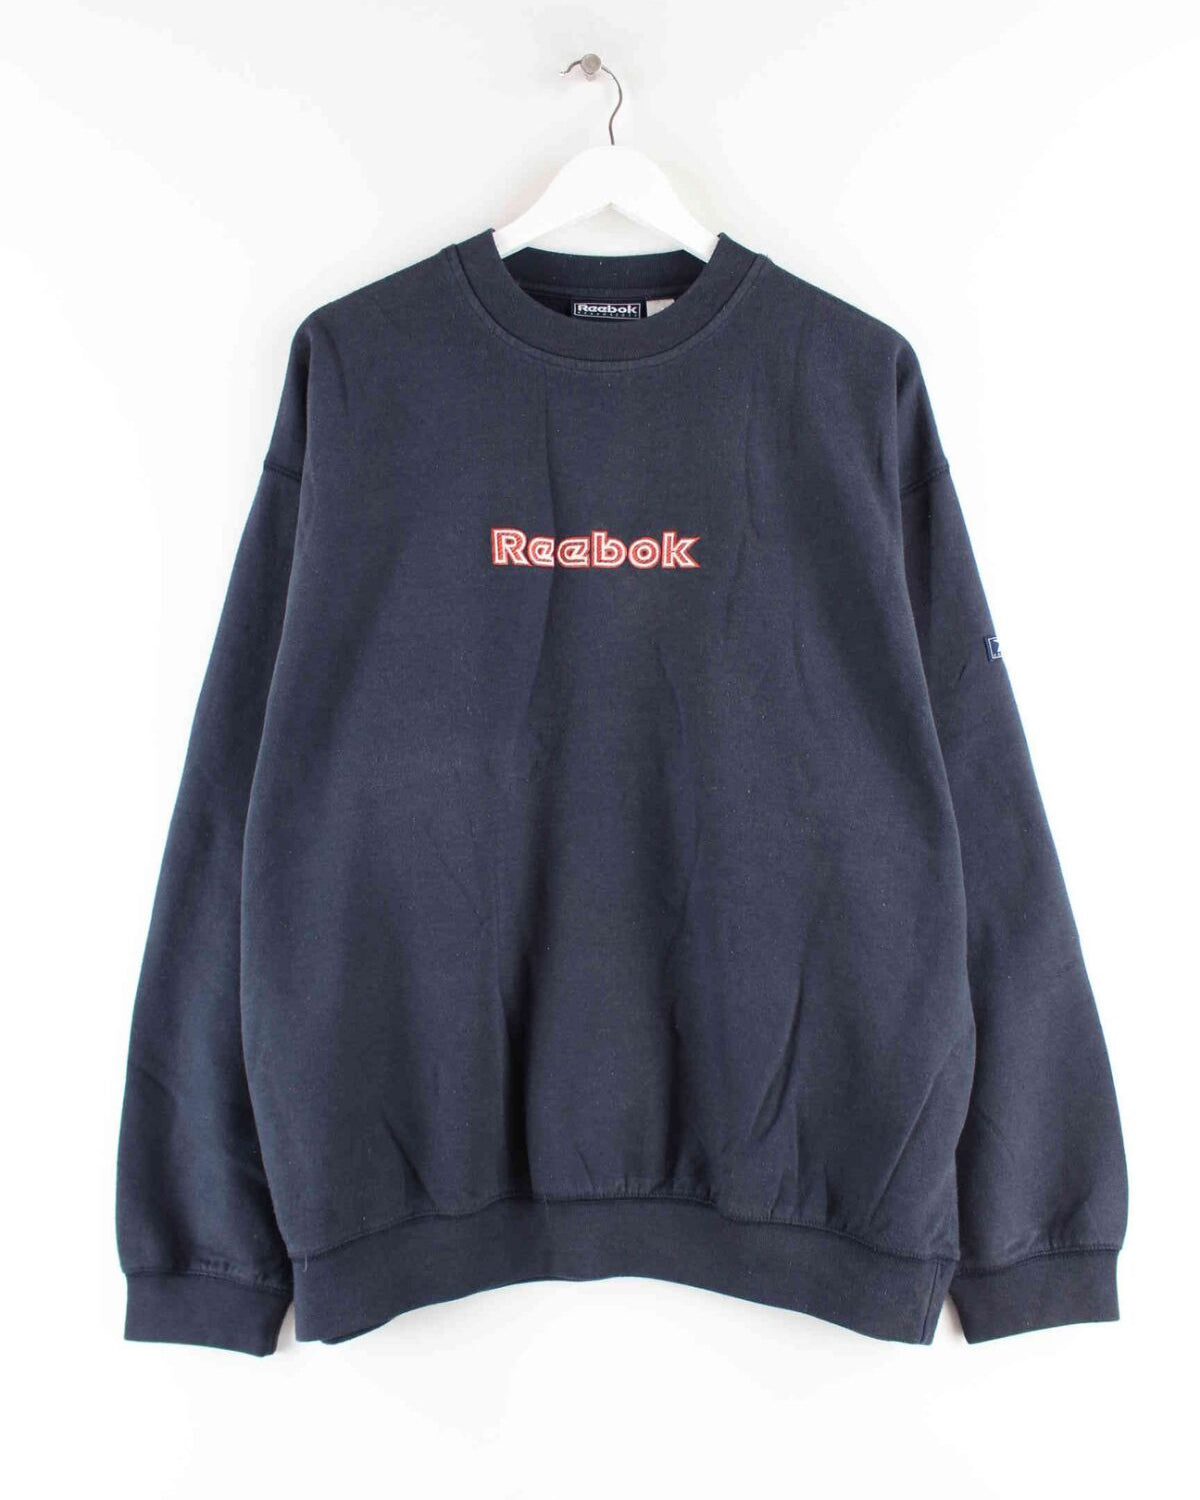 Reebok Embroidered Sweater Blau XL (front image)